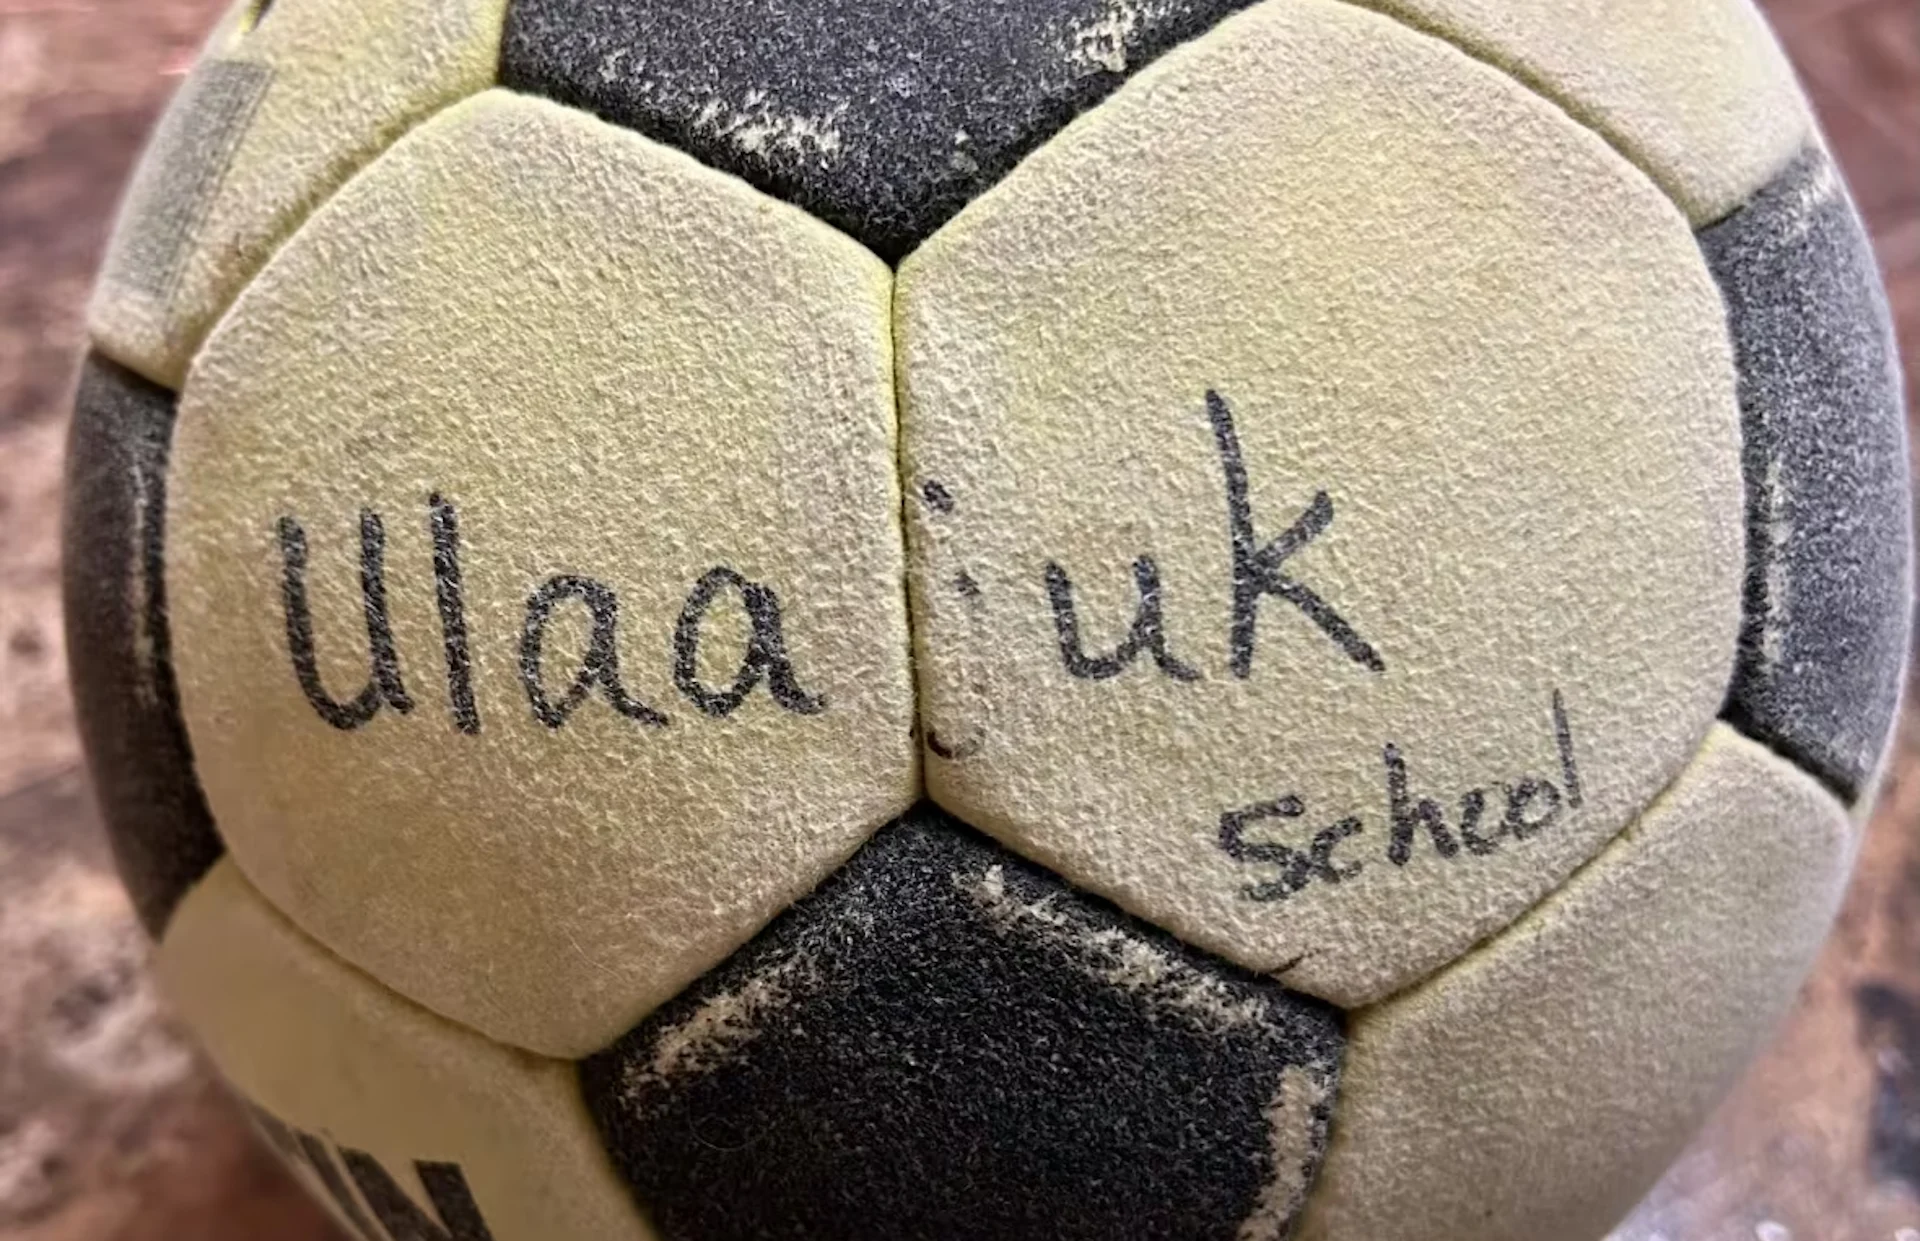 This soccer ball rode a wave from Nunavut to Newfoundland